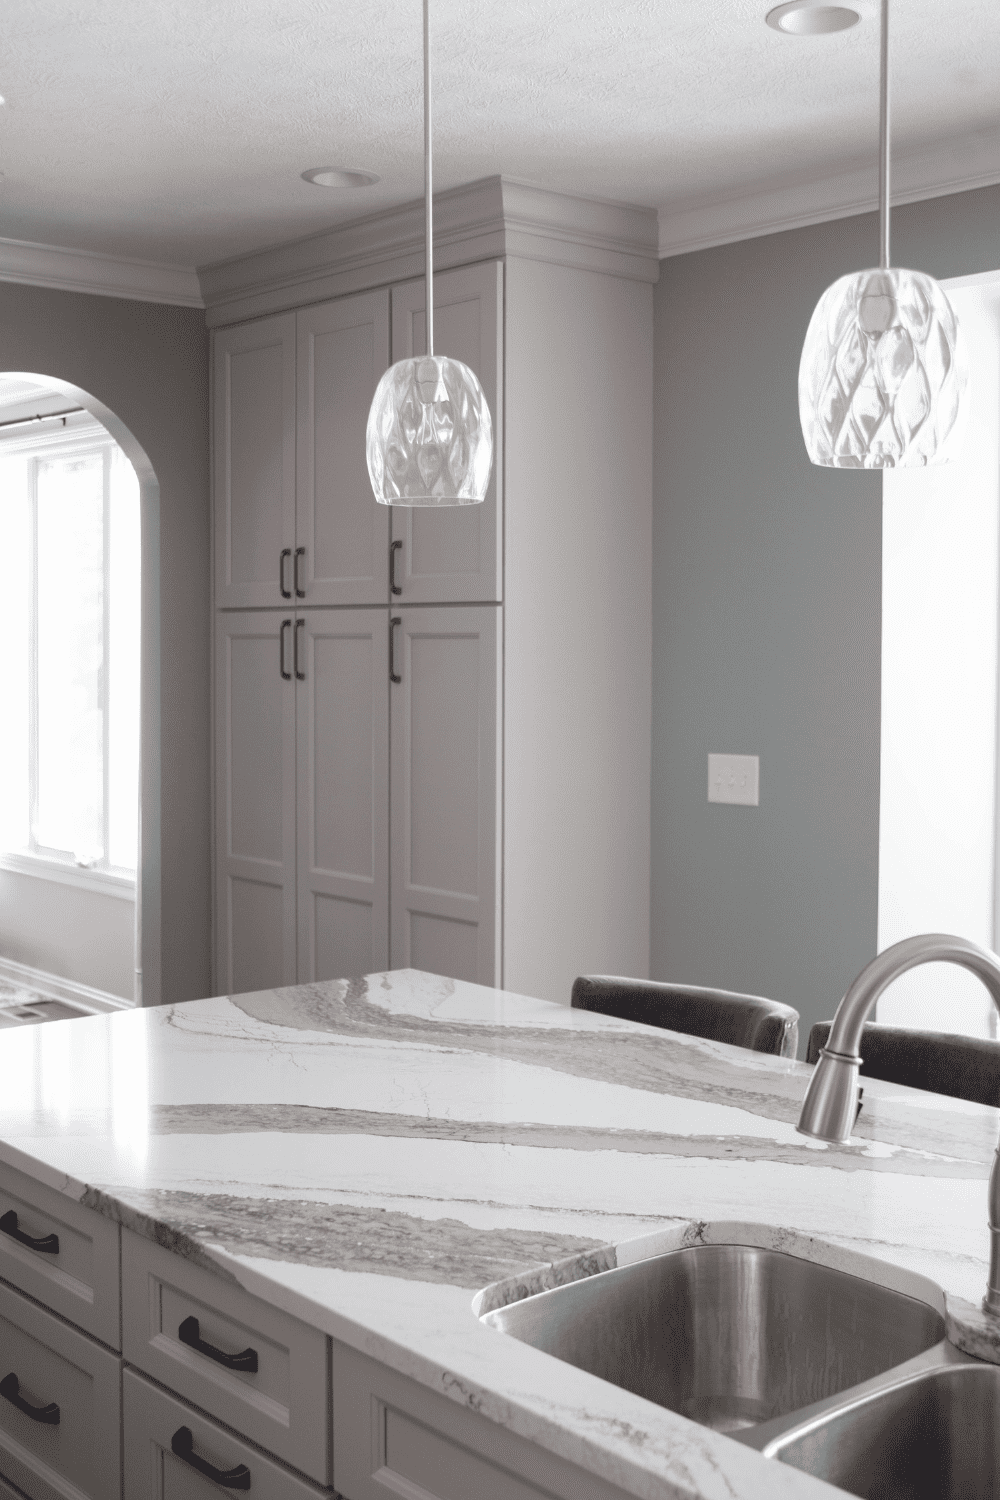 Nicholas Design Build | A kitchen with marble counter tops and a sink.